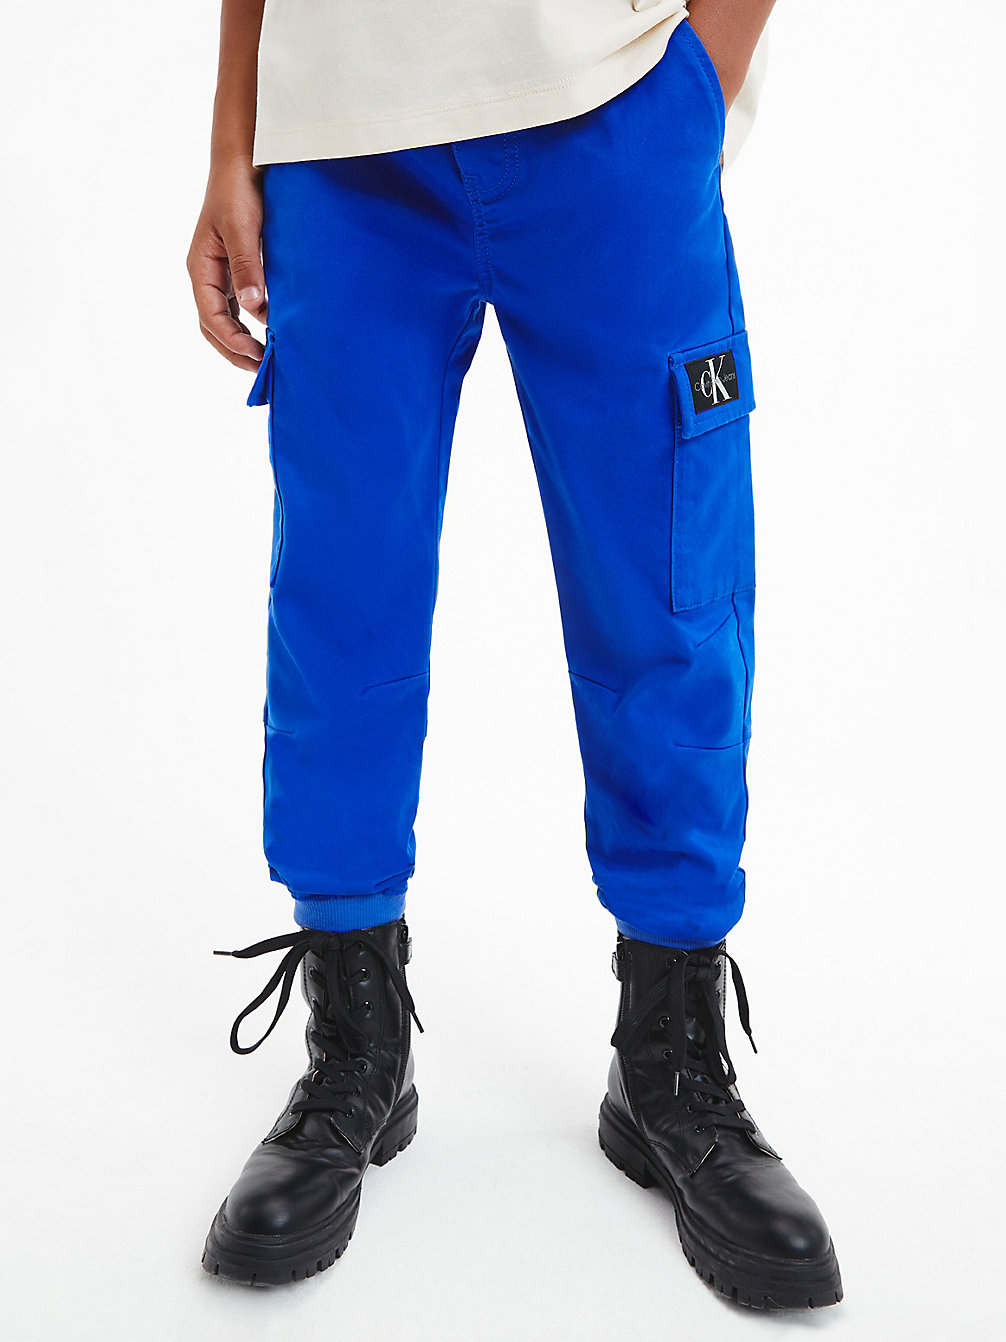 ULTRA BLUE Satin Stretch Cargo Trousers undefined boys Calvin Klein